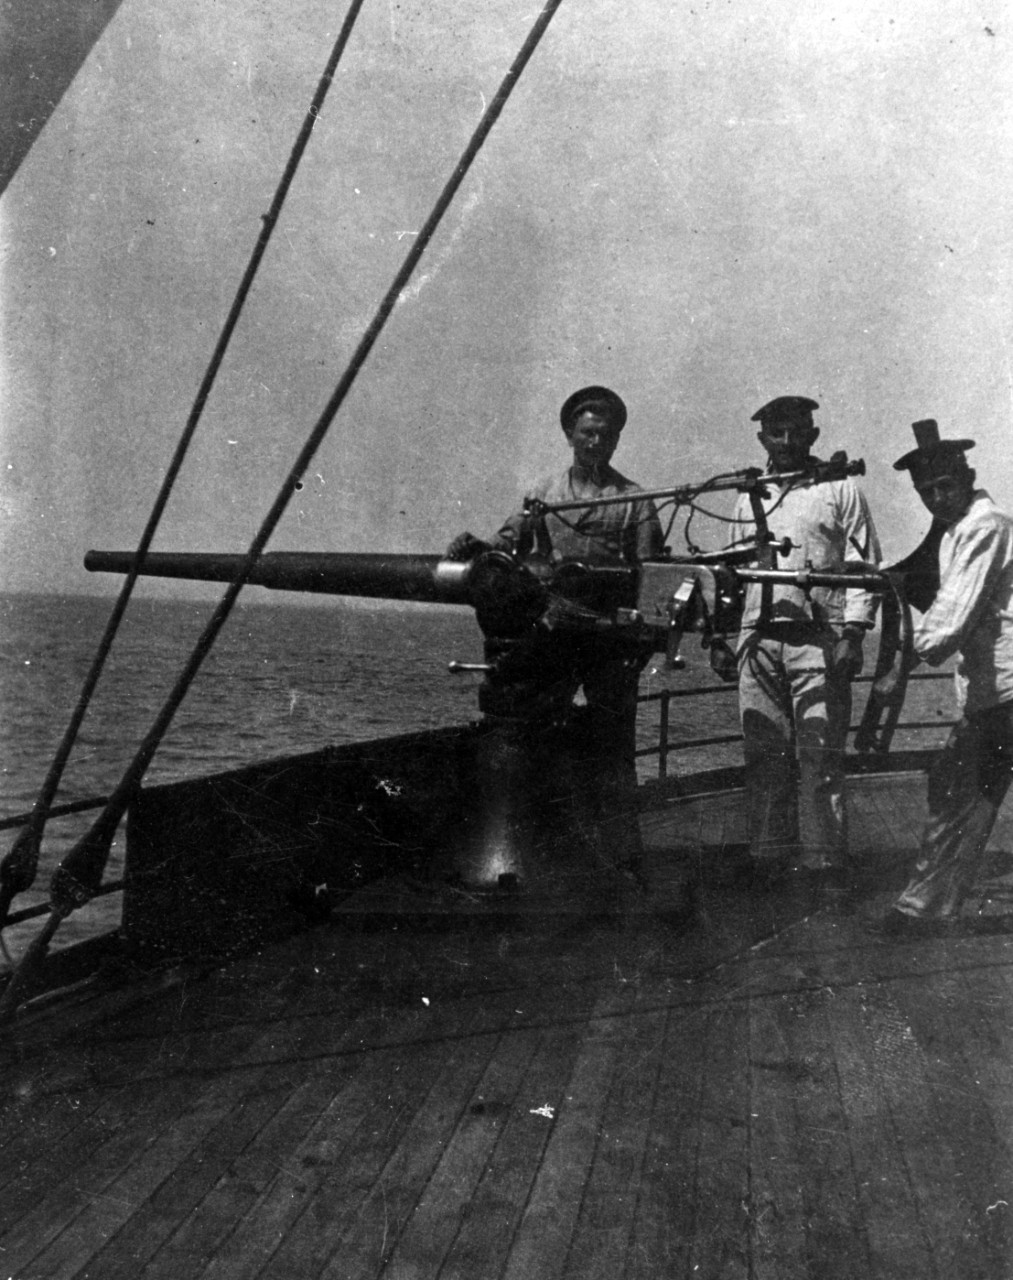 German sailors with anti-aircraft gun aboard a German naval auxiliary in about 1915-1916